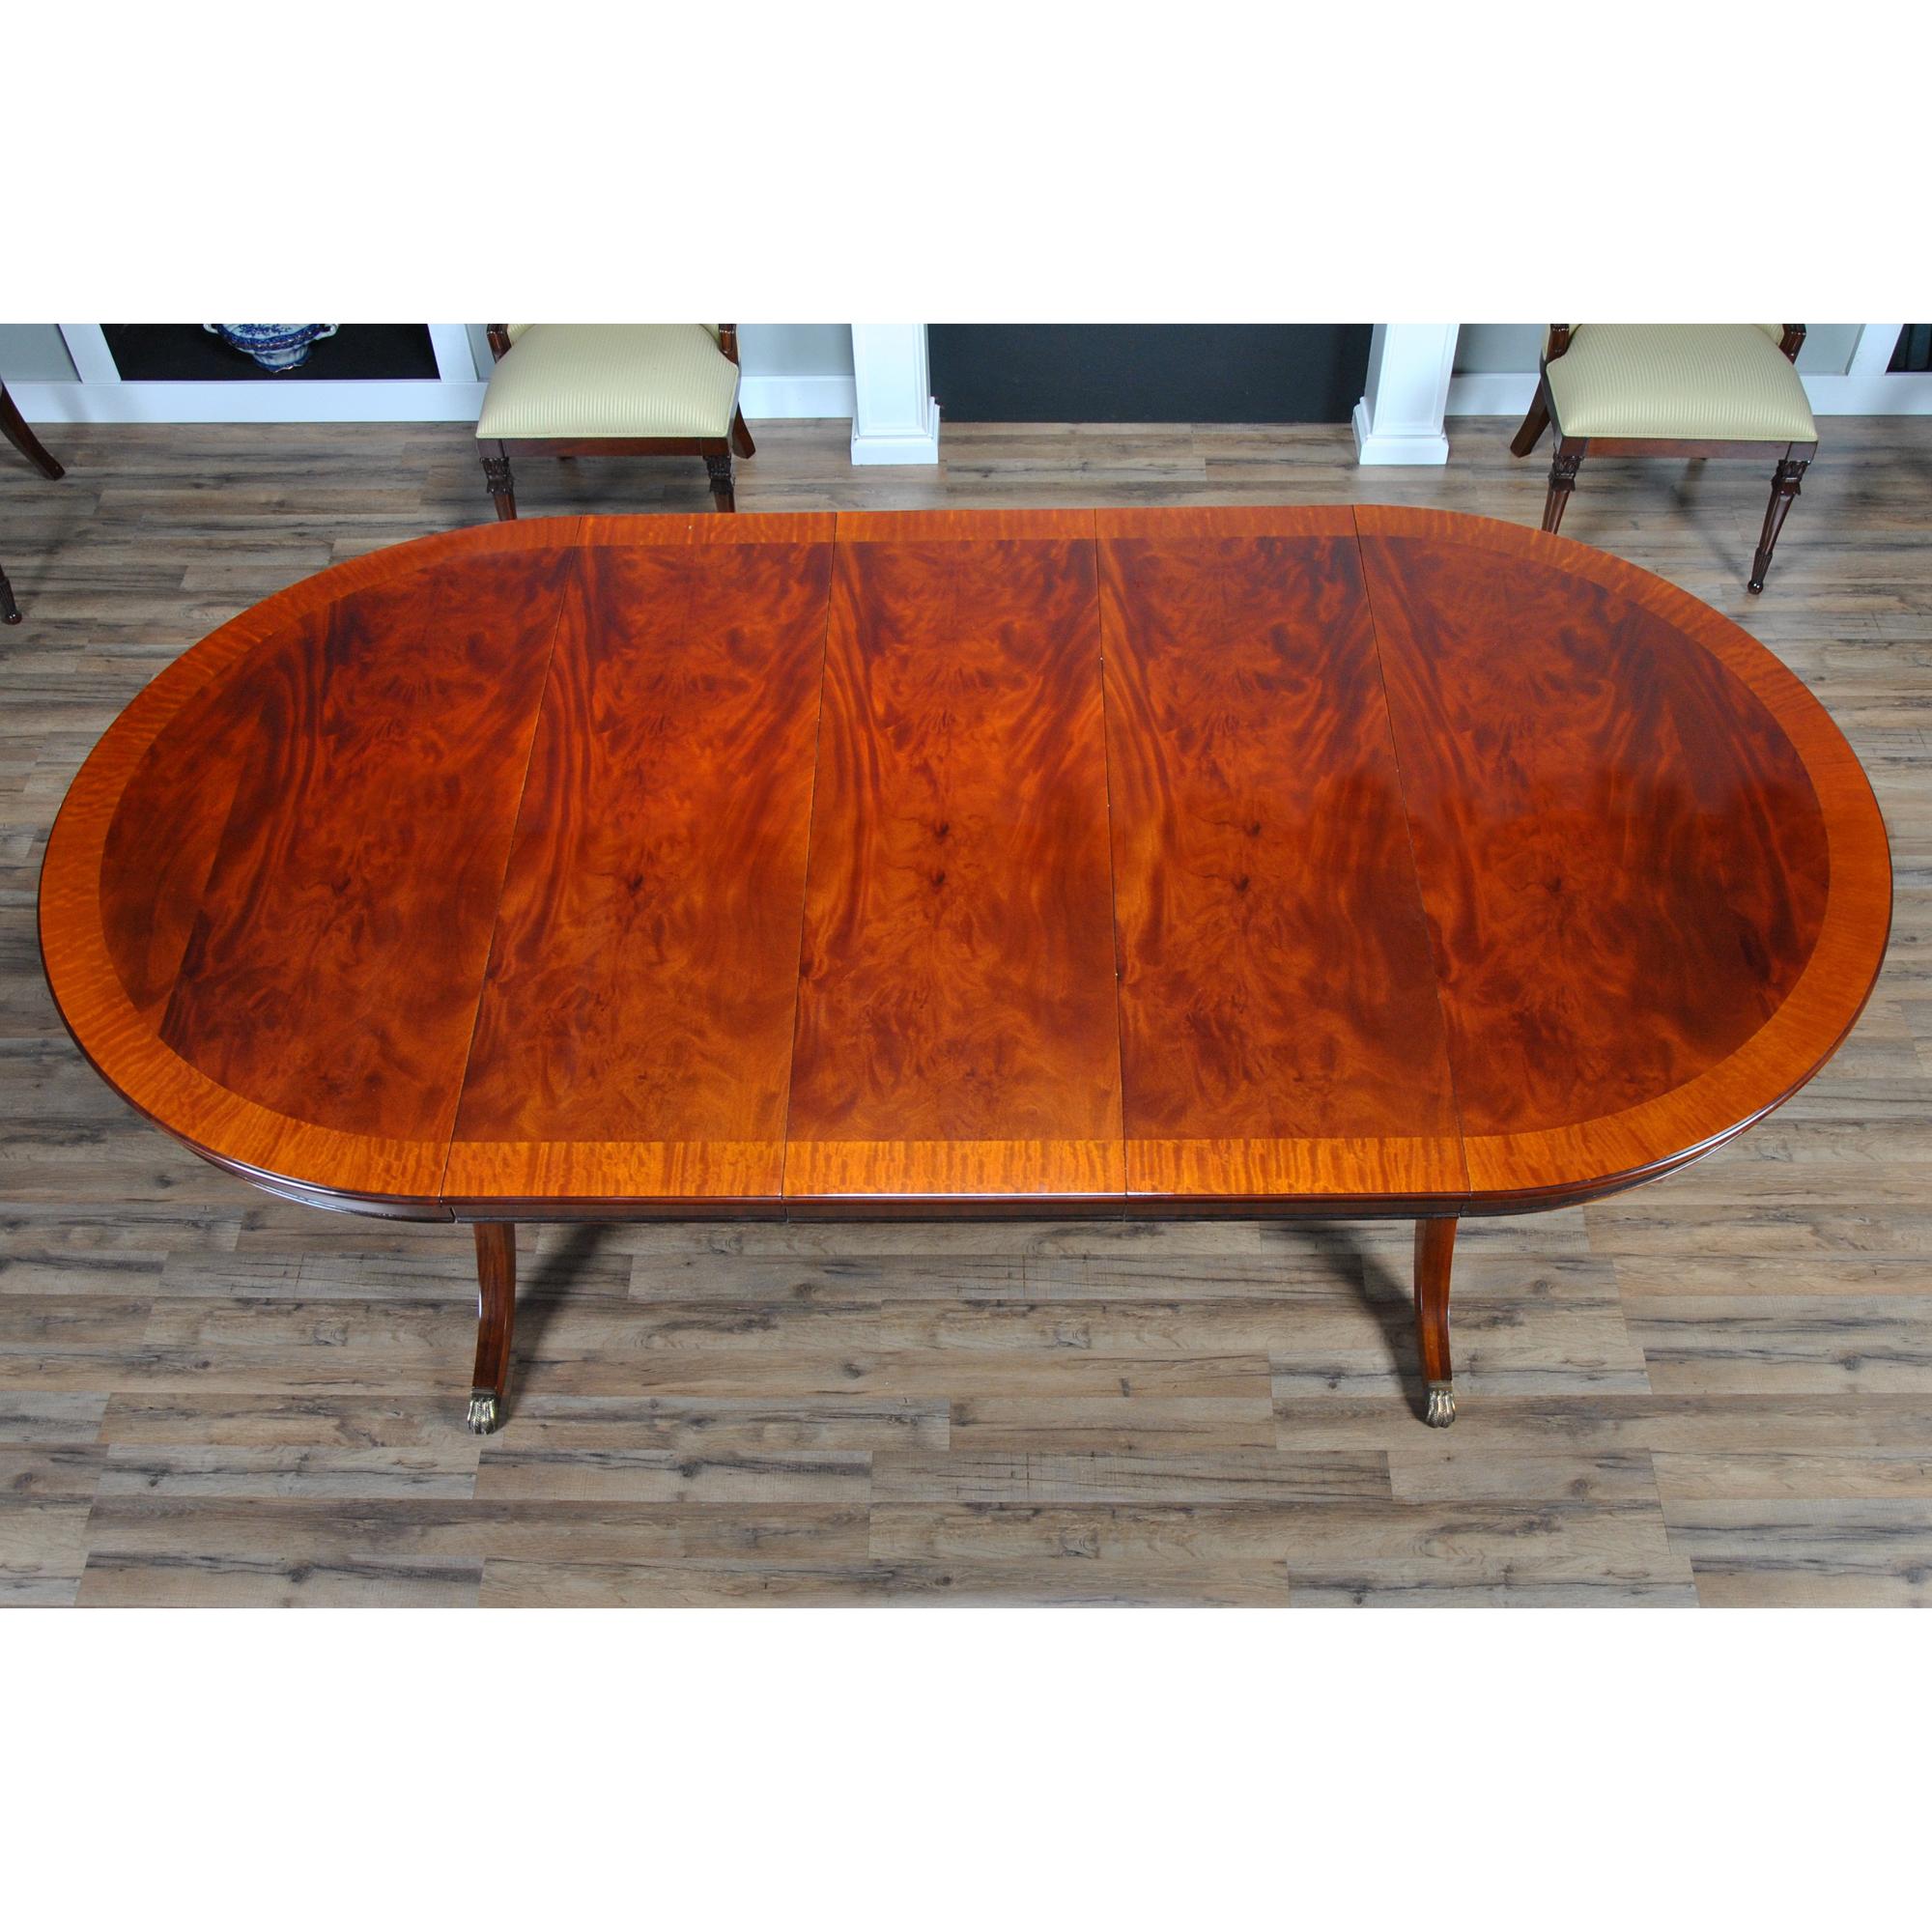 The Round Dining Table 60-115 inch is a high quality 60 inch round table when closed. The field of the table top being produced from the finest figural mahogany veneers and surrounded by satinwood banding and edged with a bull nose shaped molding.